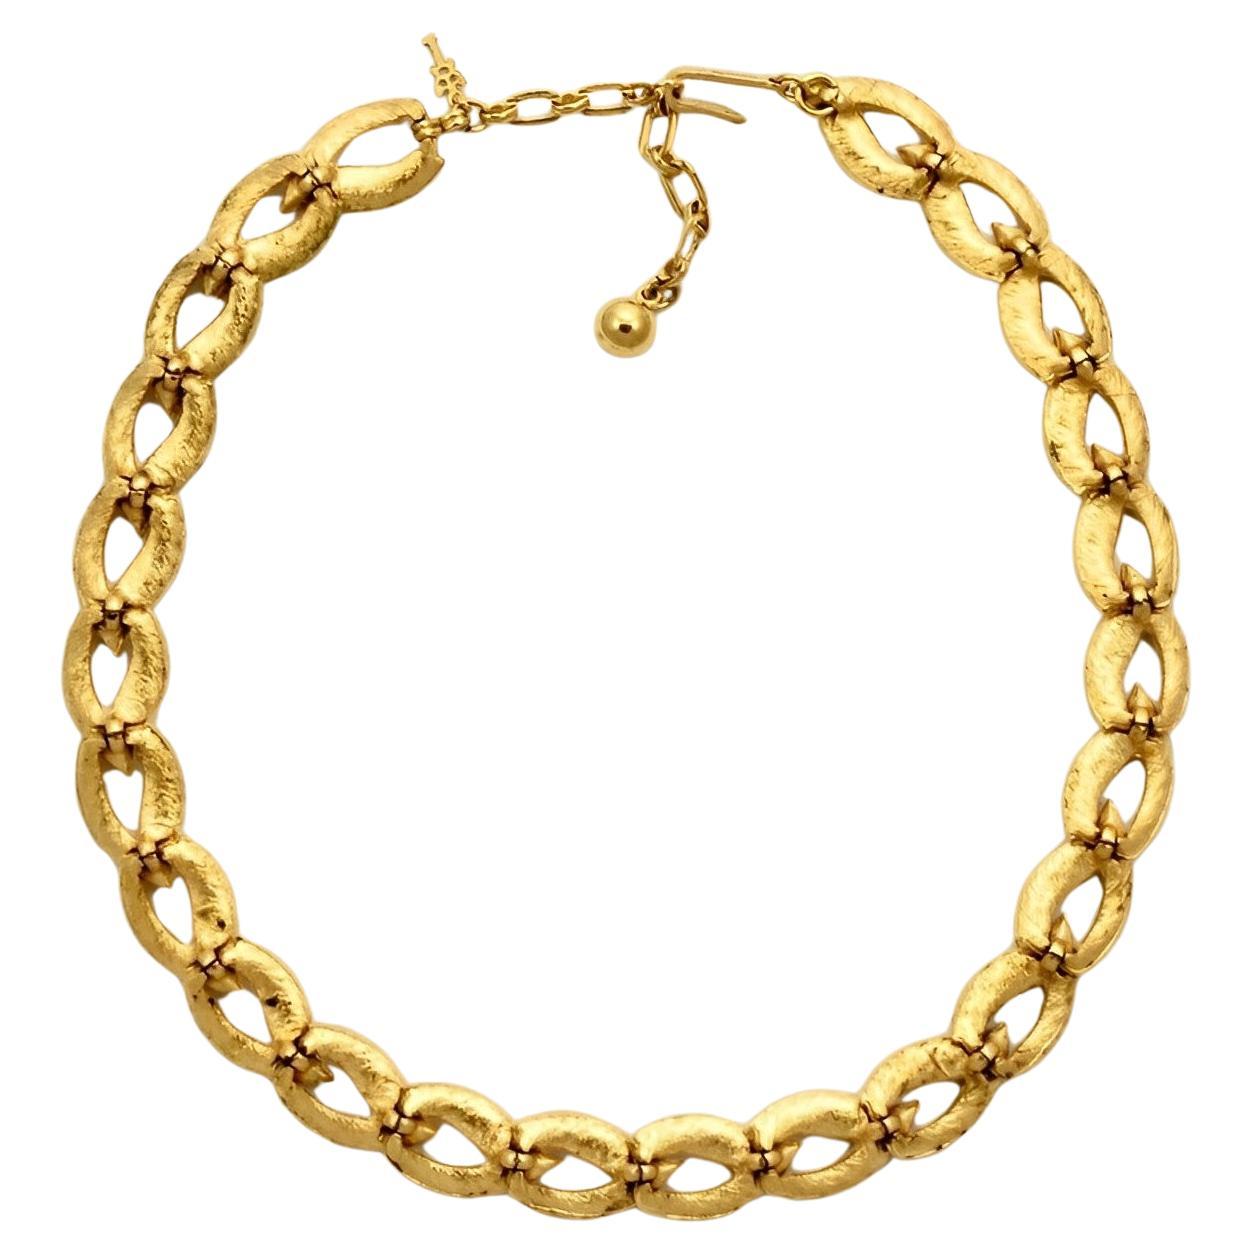 Beautiful Trifari brushed and shiny gold plated leaf link design necklace. Length 40.5 cm / 15.9 inches, including the extension, by width 1.2 cm / .47 inch. There is wear to the gold plating.

This lovely vintage necklace would look wonderful with